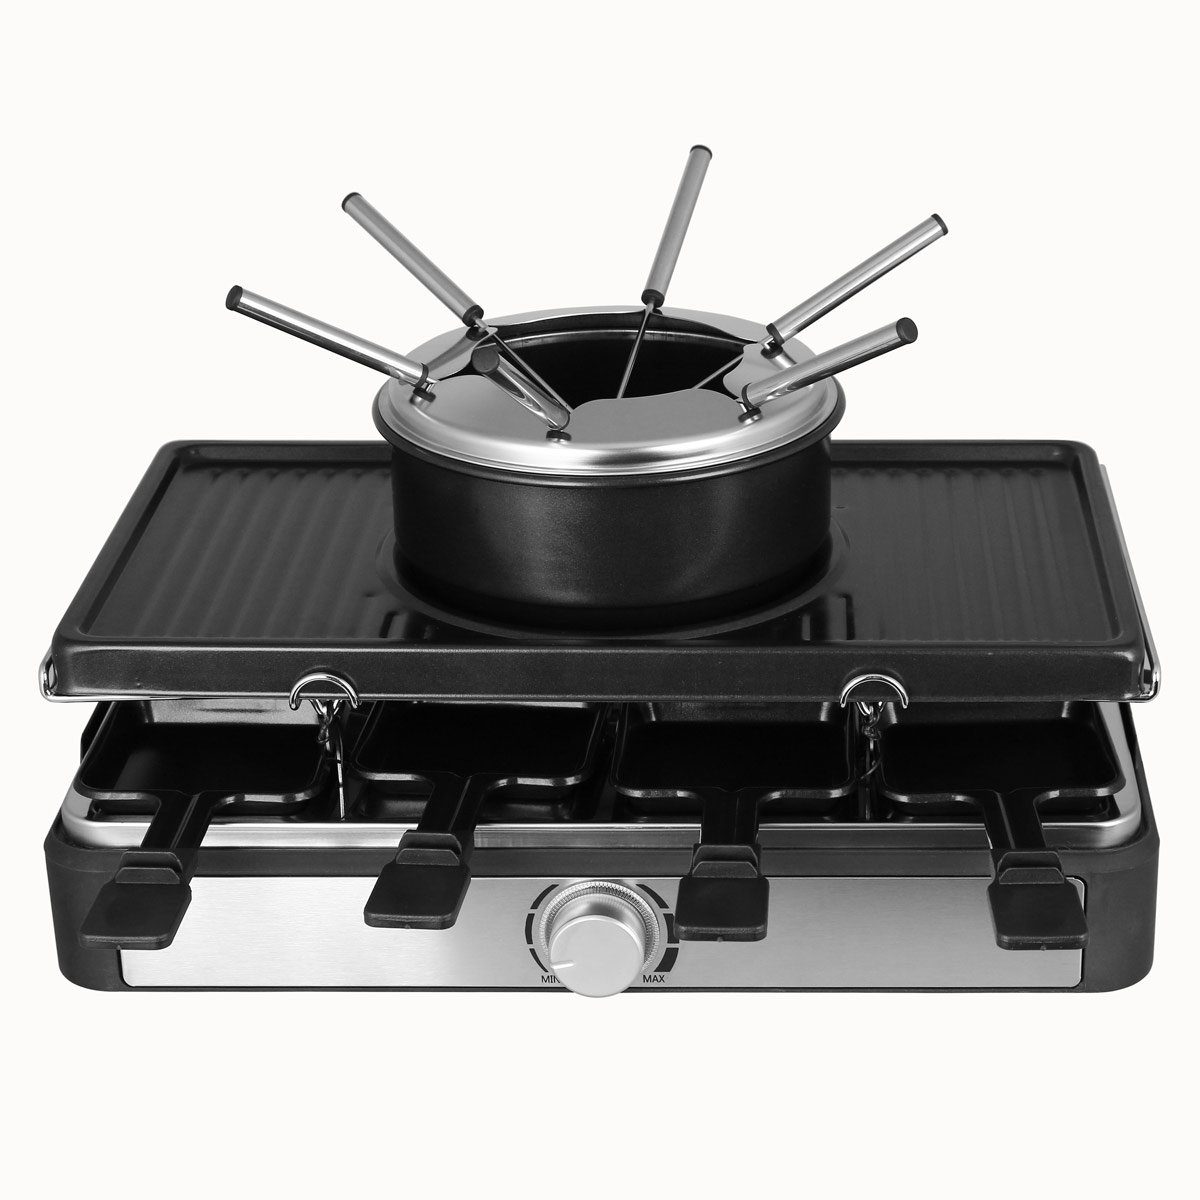 Emerio Raclette RG 124930, 3 W Raclette, und Grill 1300 1 Set, in Fondue